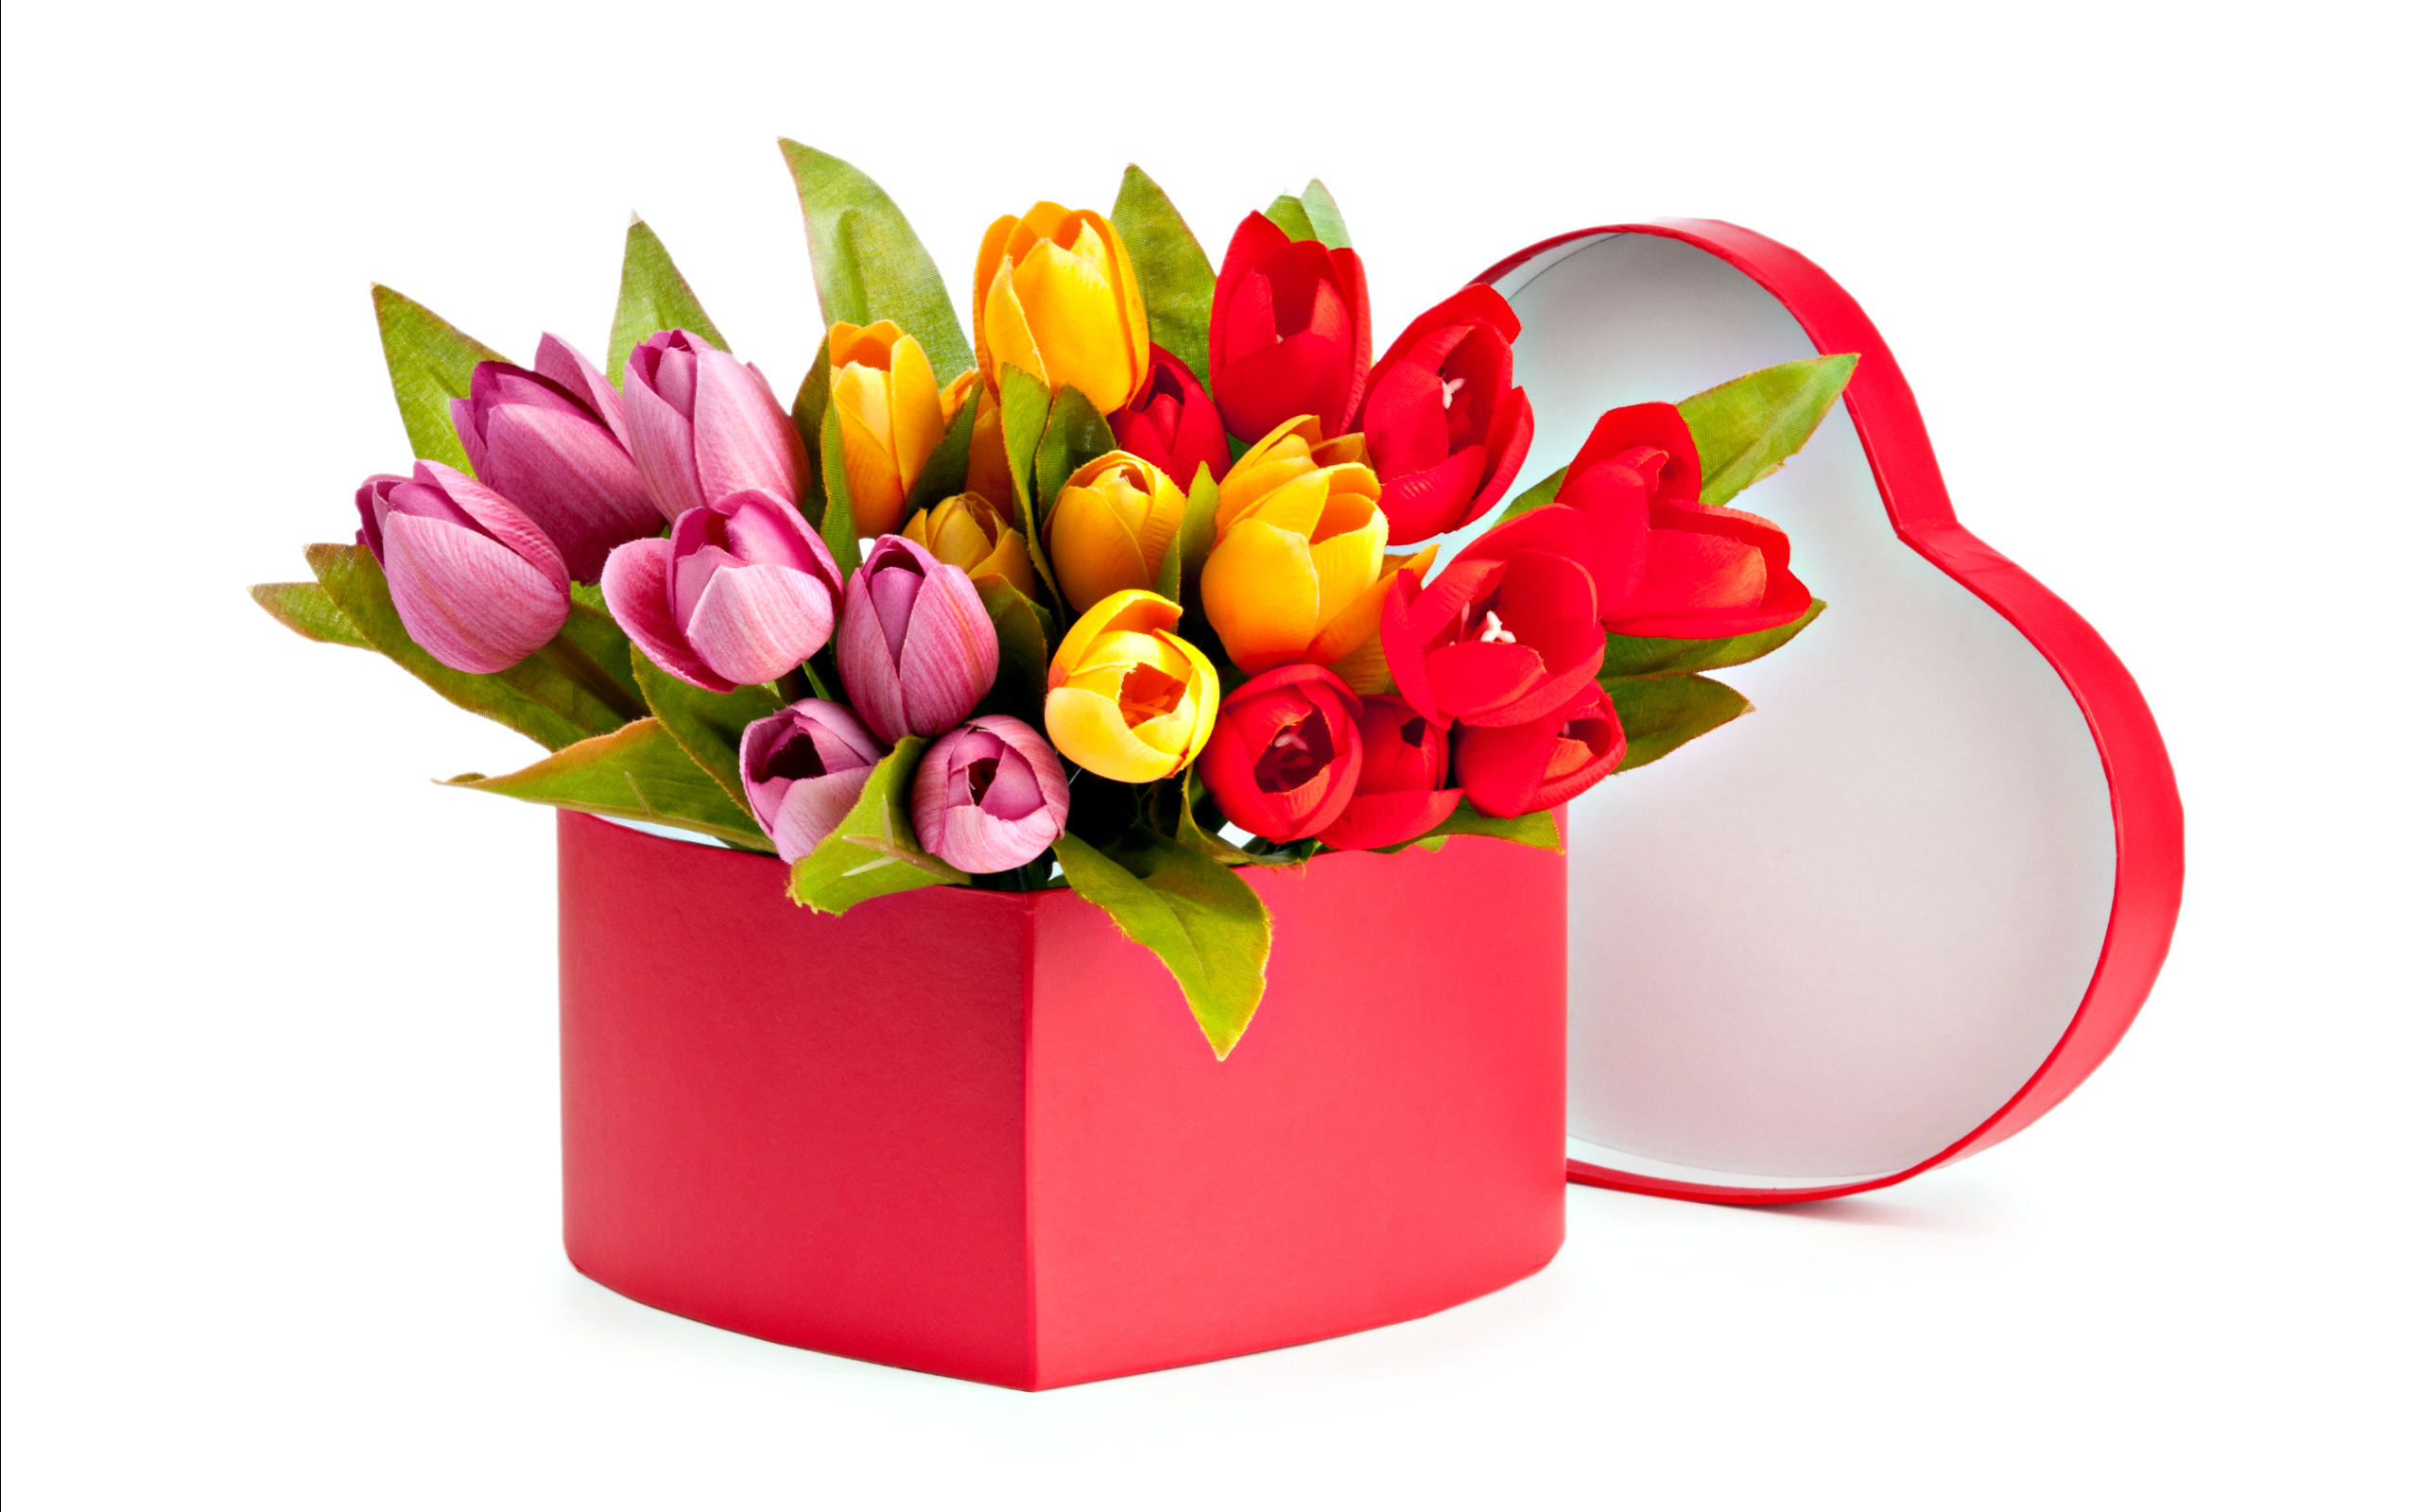 red flower, man made, flower, box, colorful, colors, pink flower, tulip, yellow flower Aesthetic wallpaper